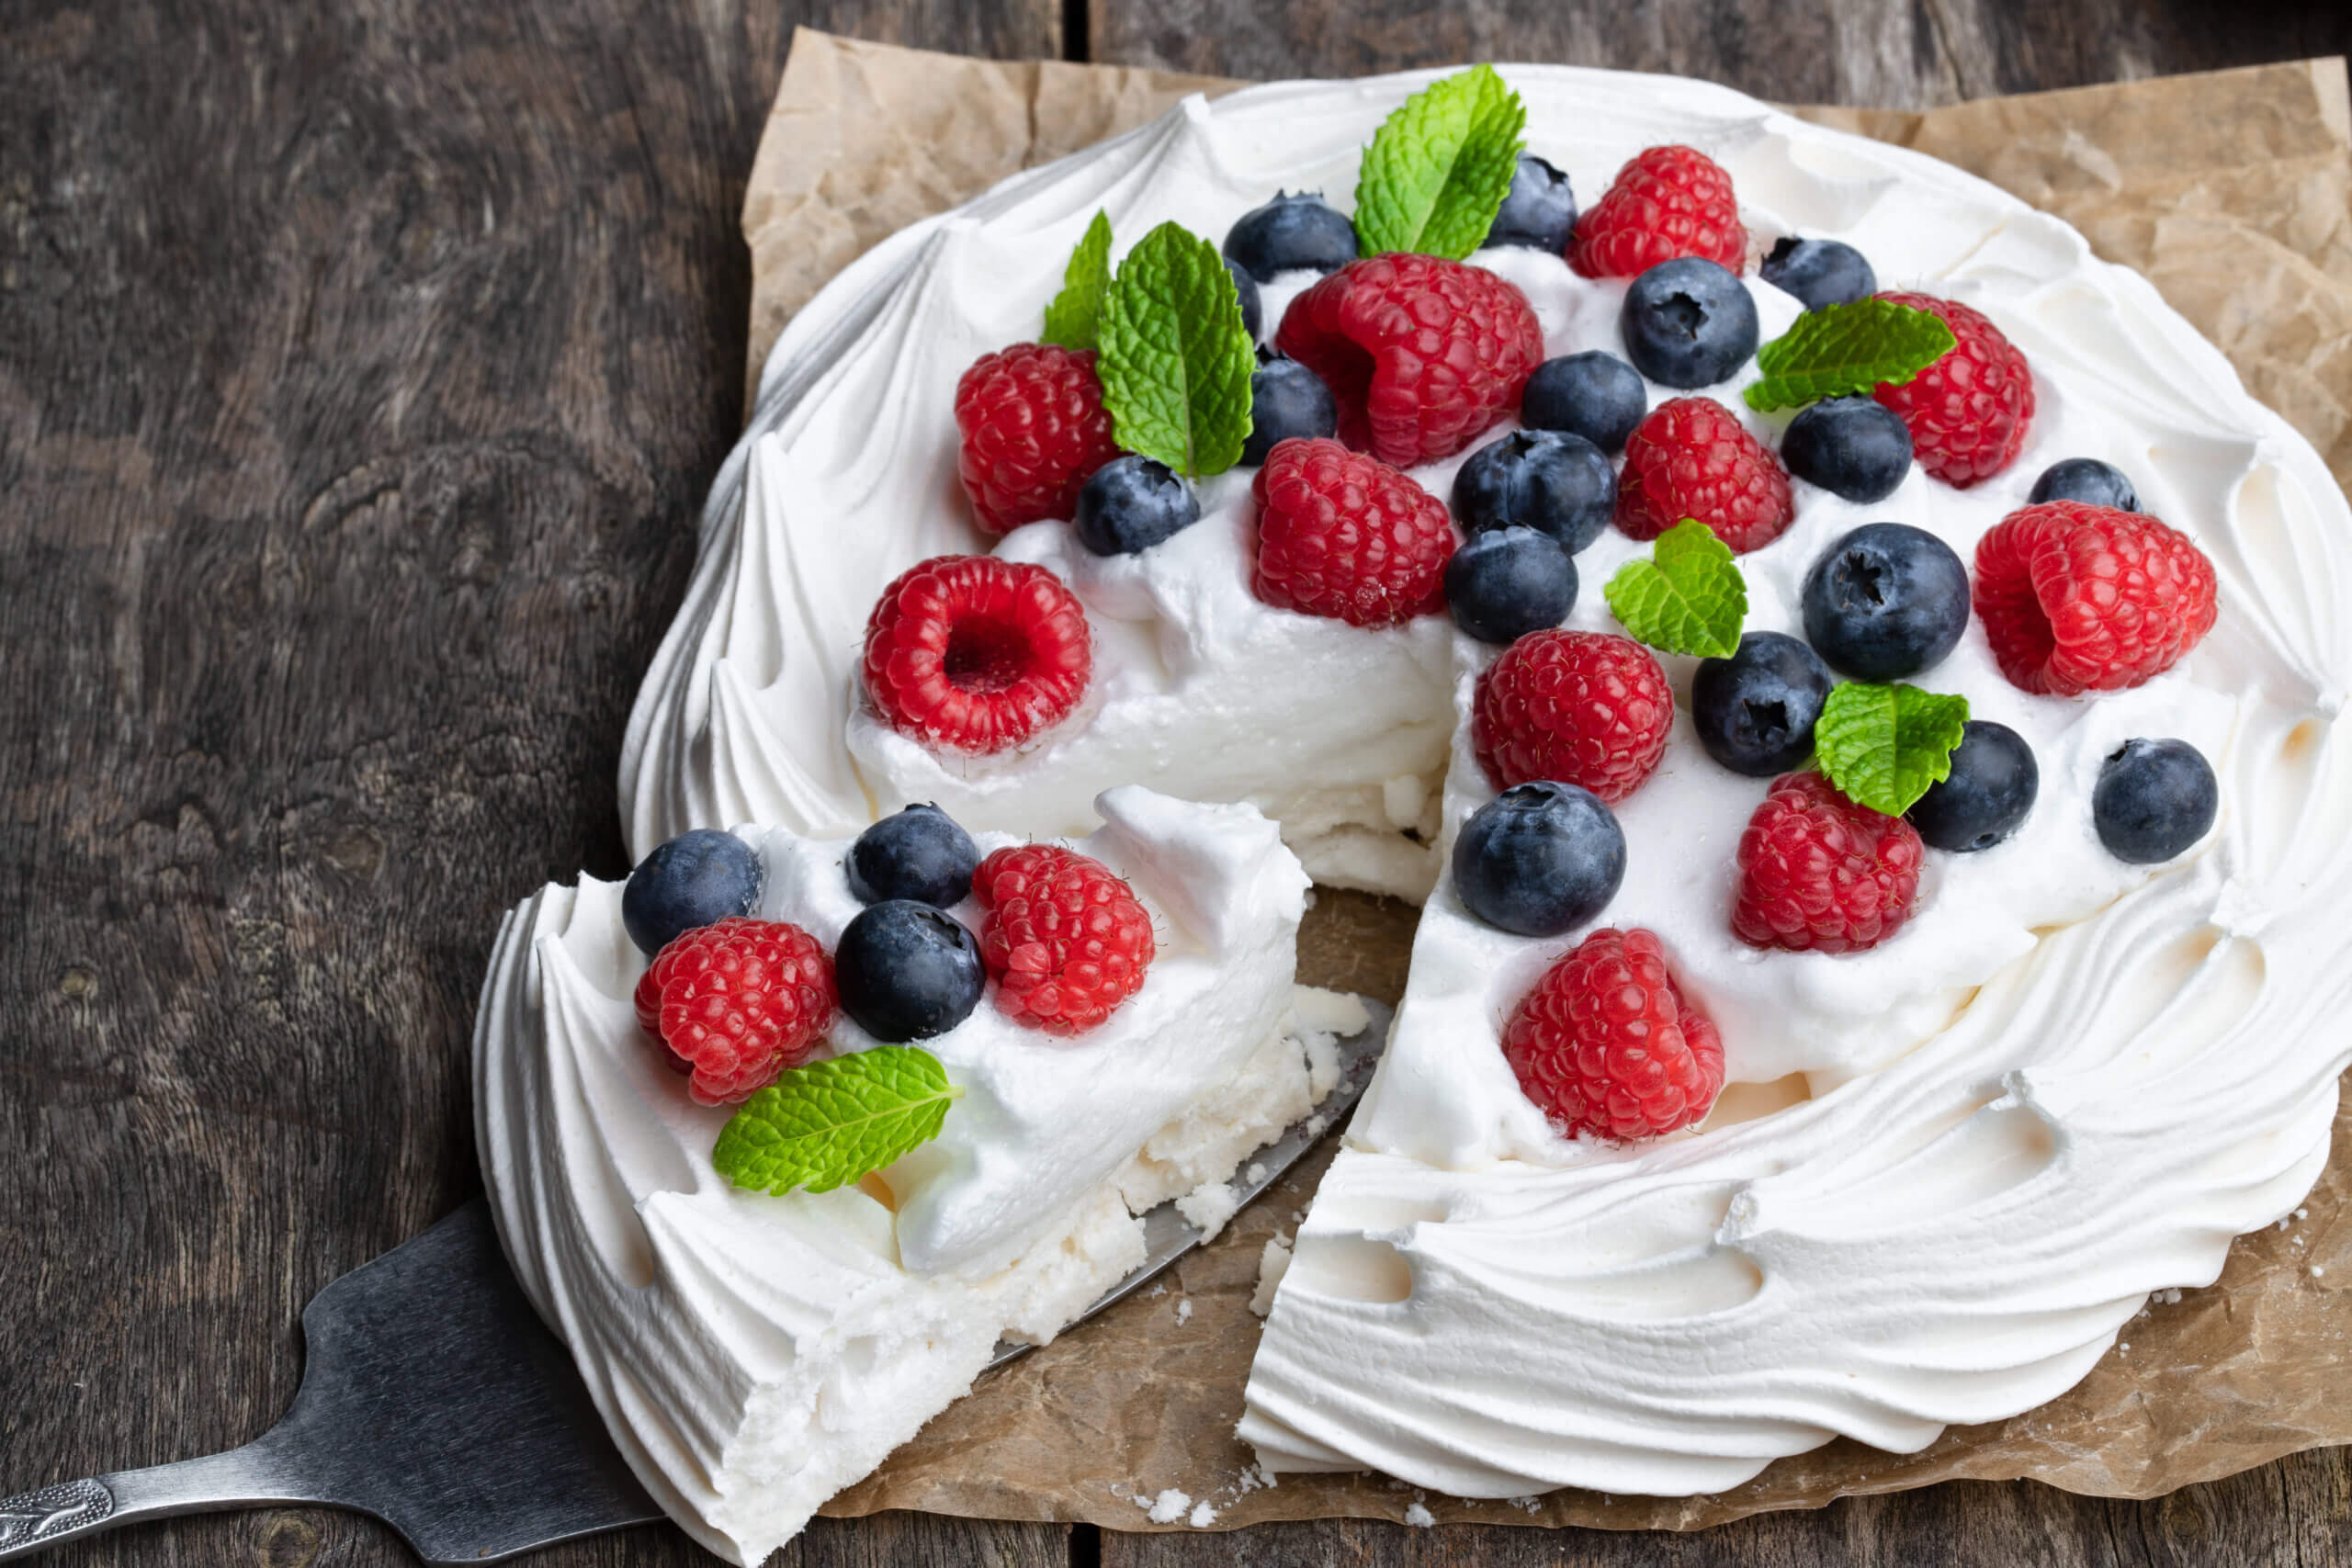 Pavlova with berries and mint leaves